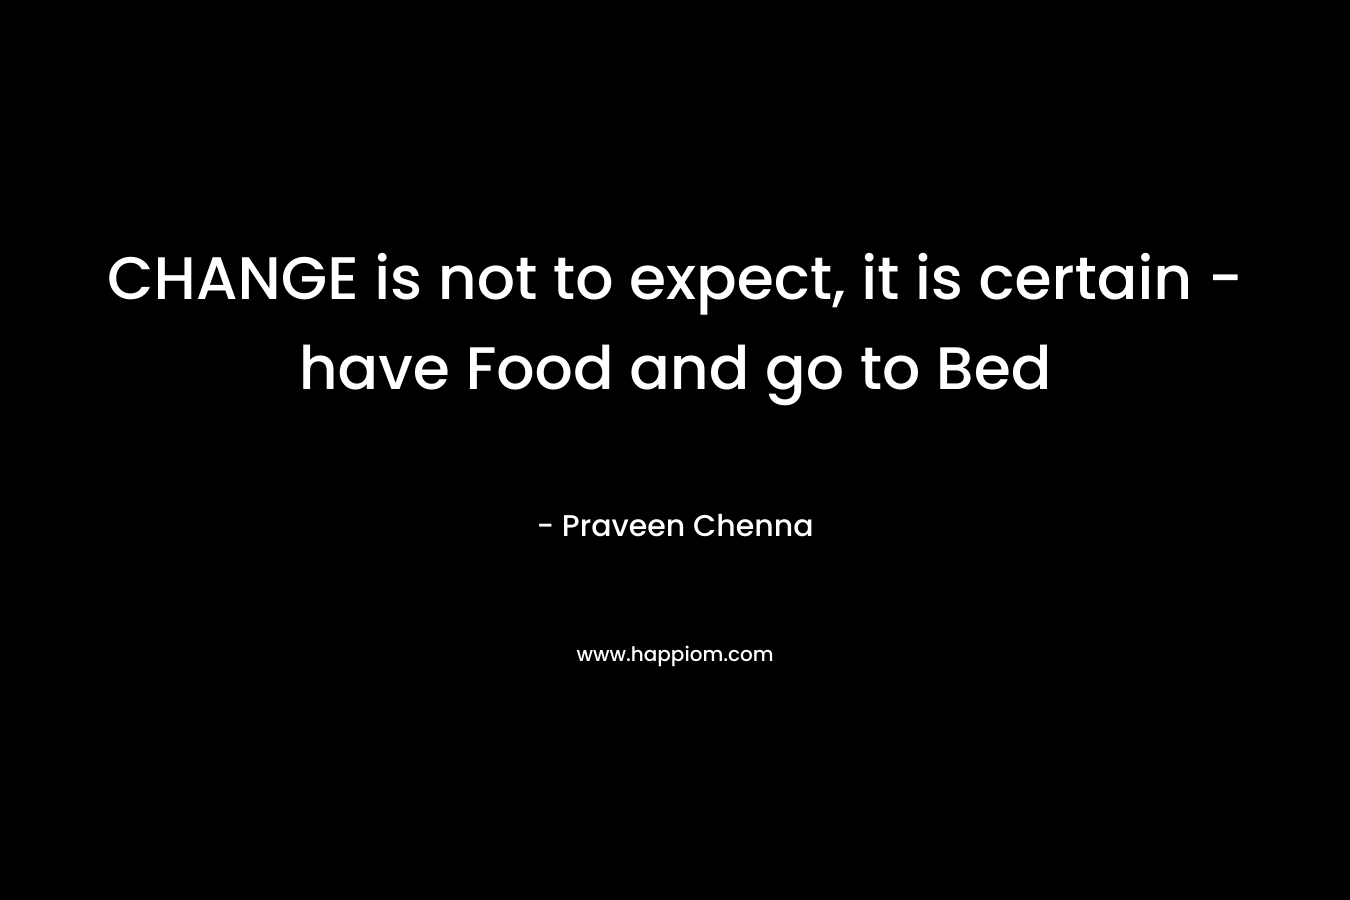 CHANGE is not to expect, it is certain -have Food and go to Bed